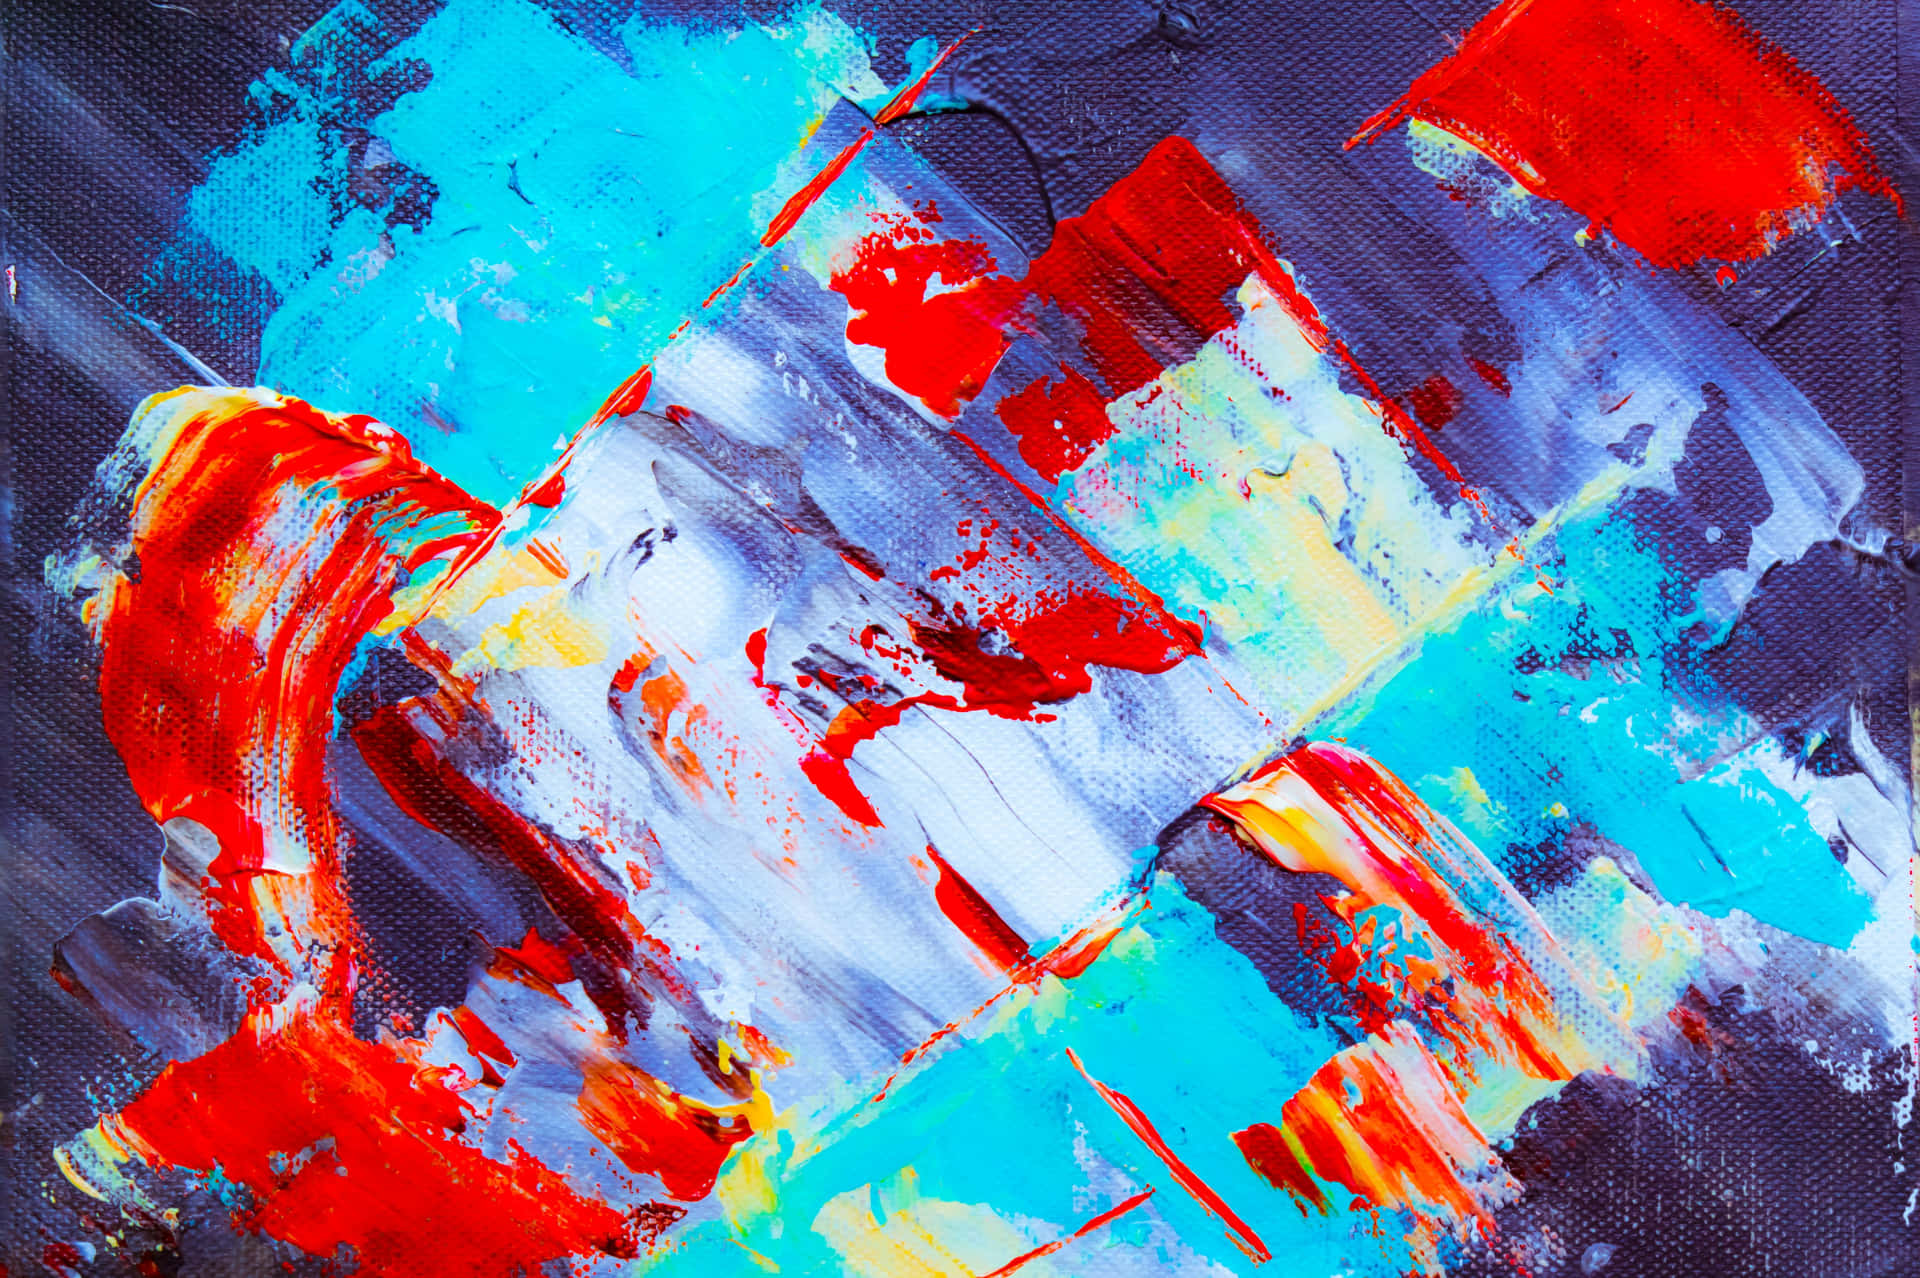 Expressionist Masterpiece on Canvas Wallpaper